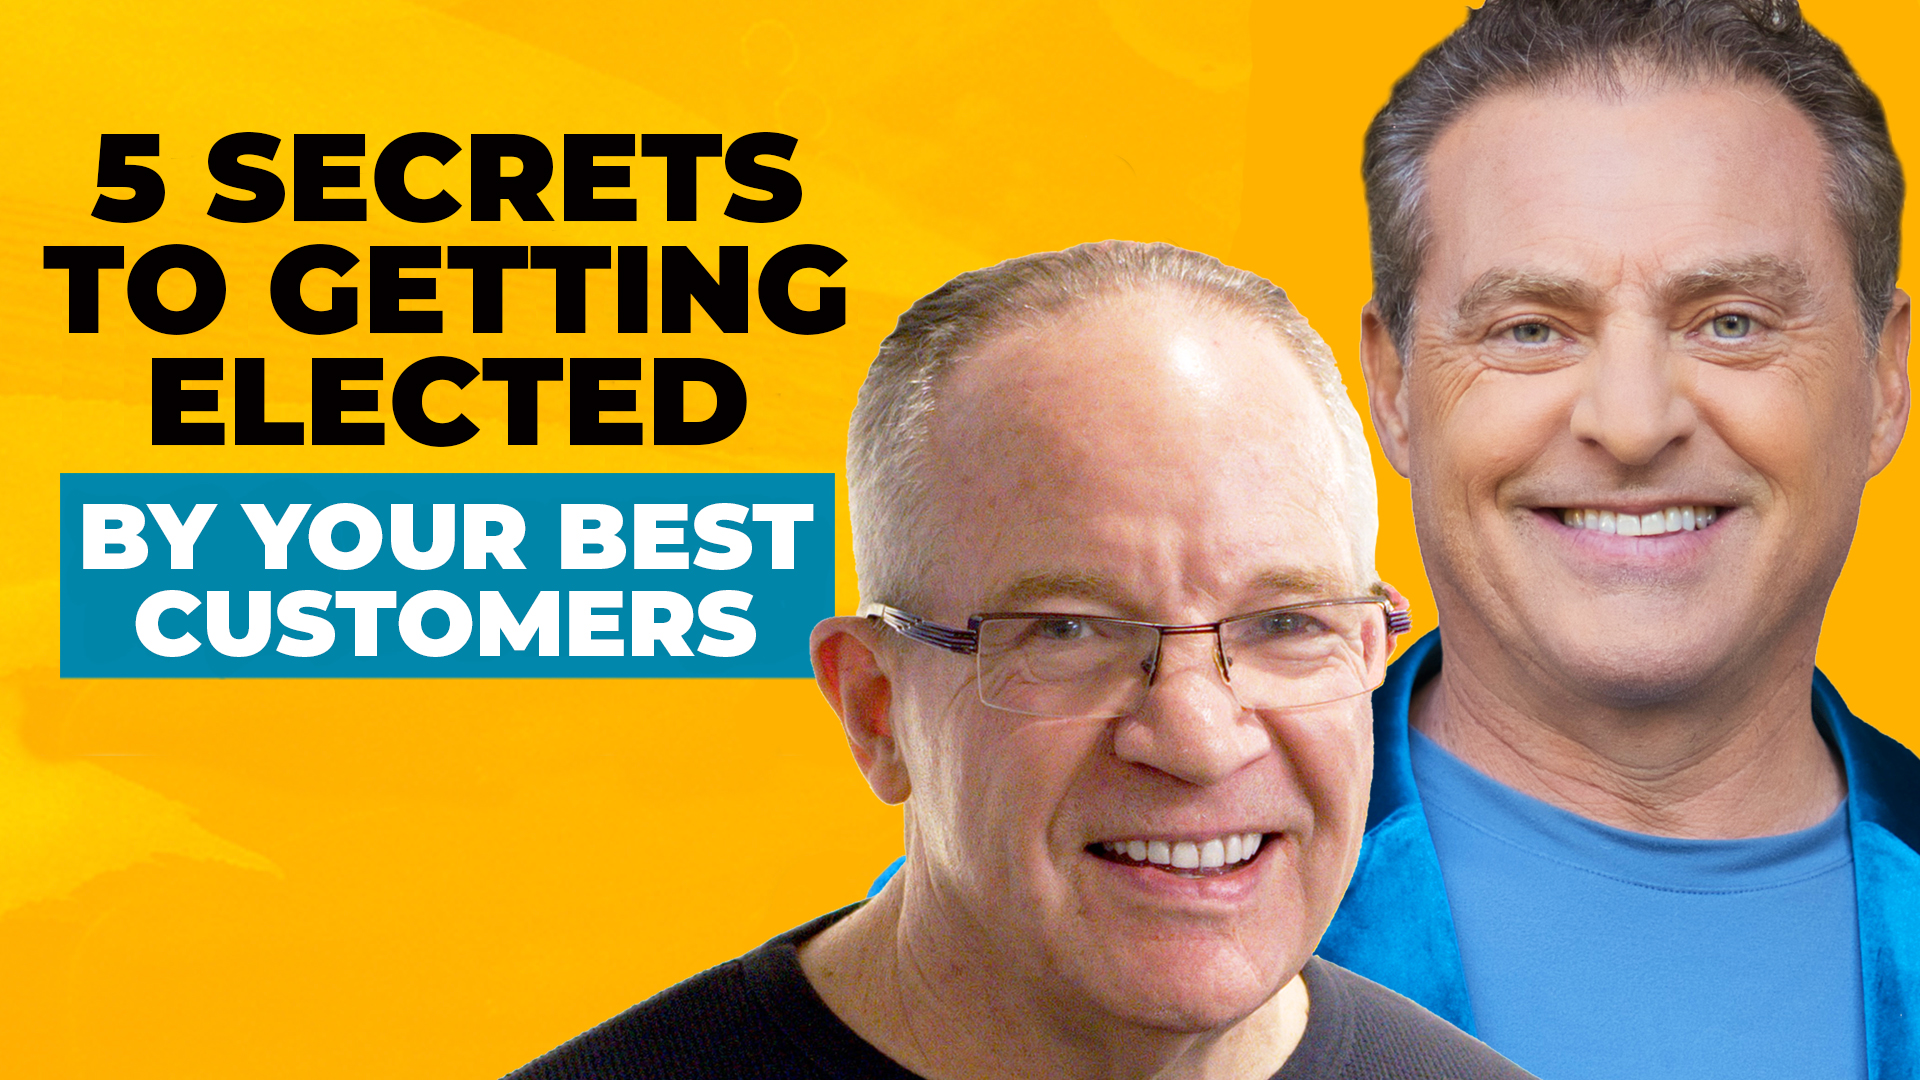 Headshots of Mike Koenigs and Dan Sullivan on a bold yellow background, along with text reading "5 Secrets to Getting Elected by Your Best Customers."